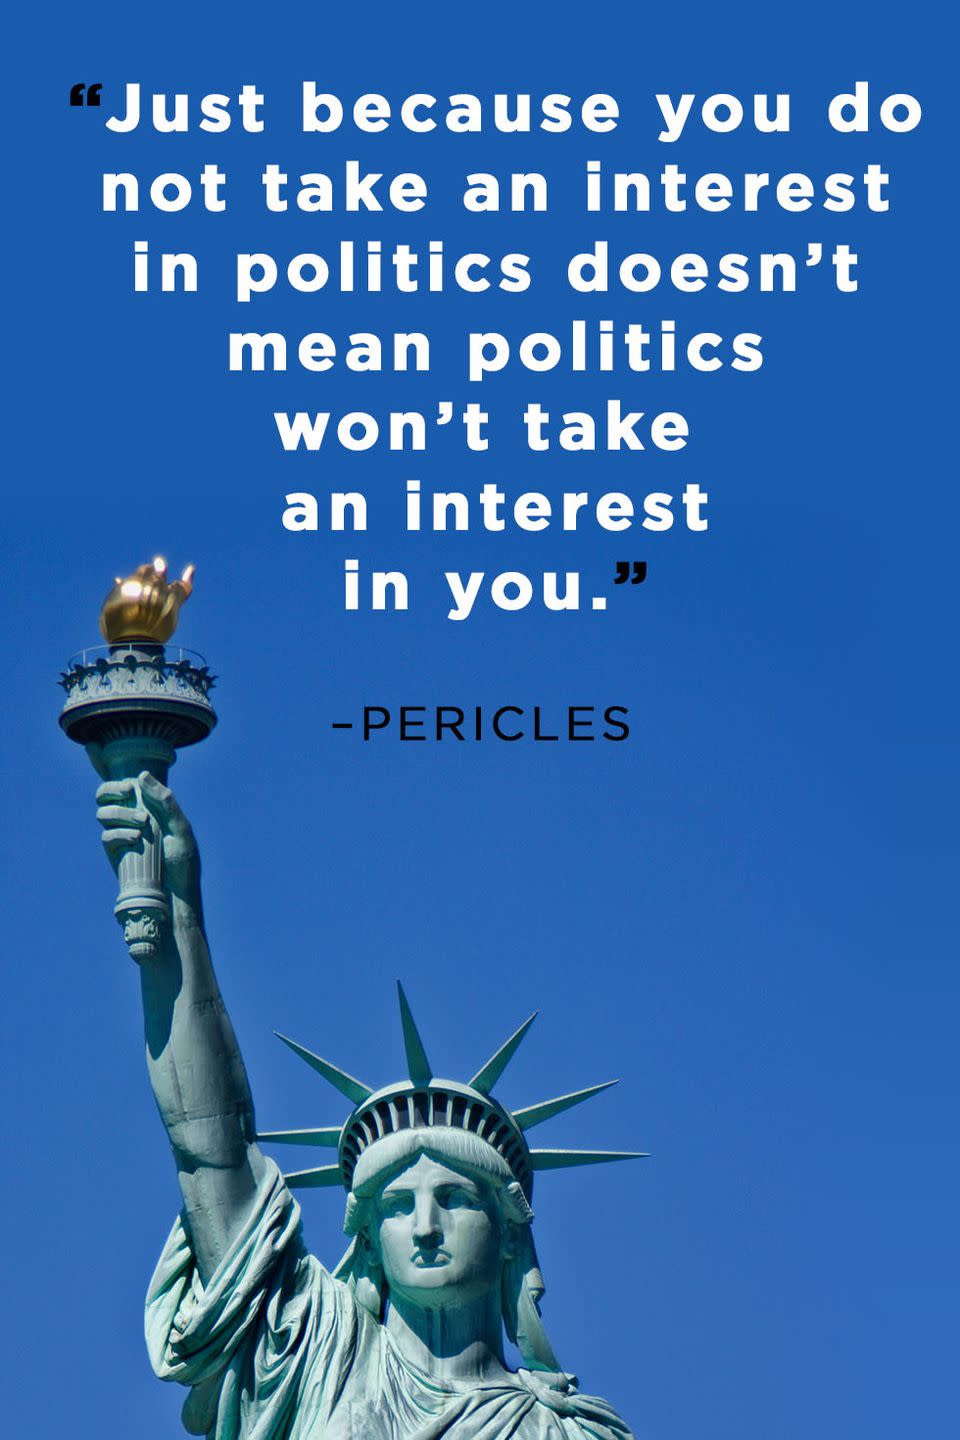 <p>“Just because you do not take an interest in politics doesn’t mean politics won’t take an interest in you.”</p>